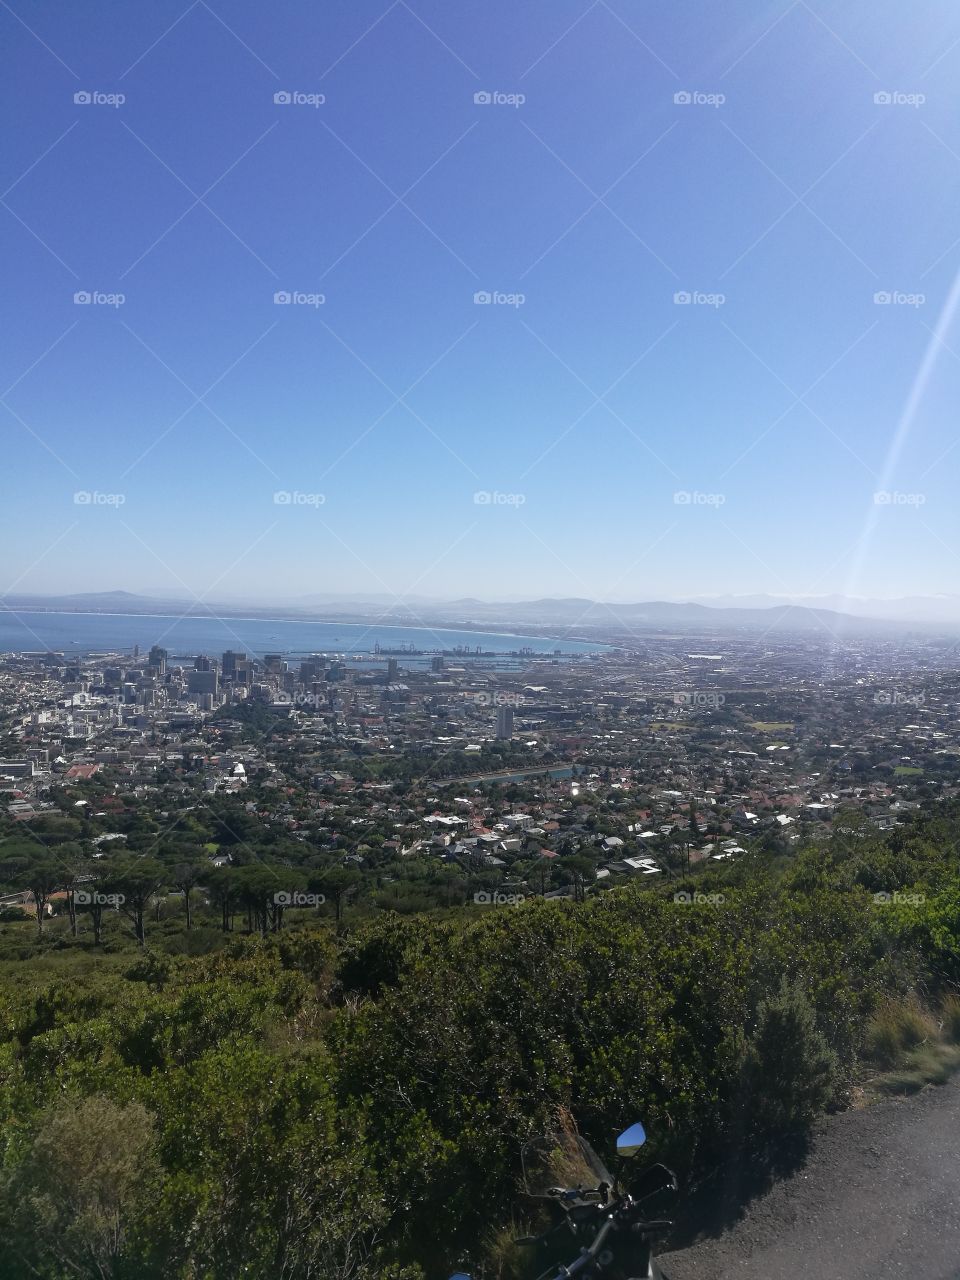 Cape Town from the mountains